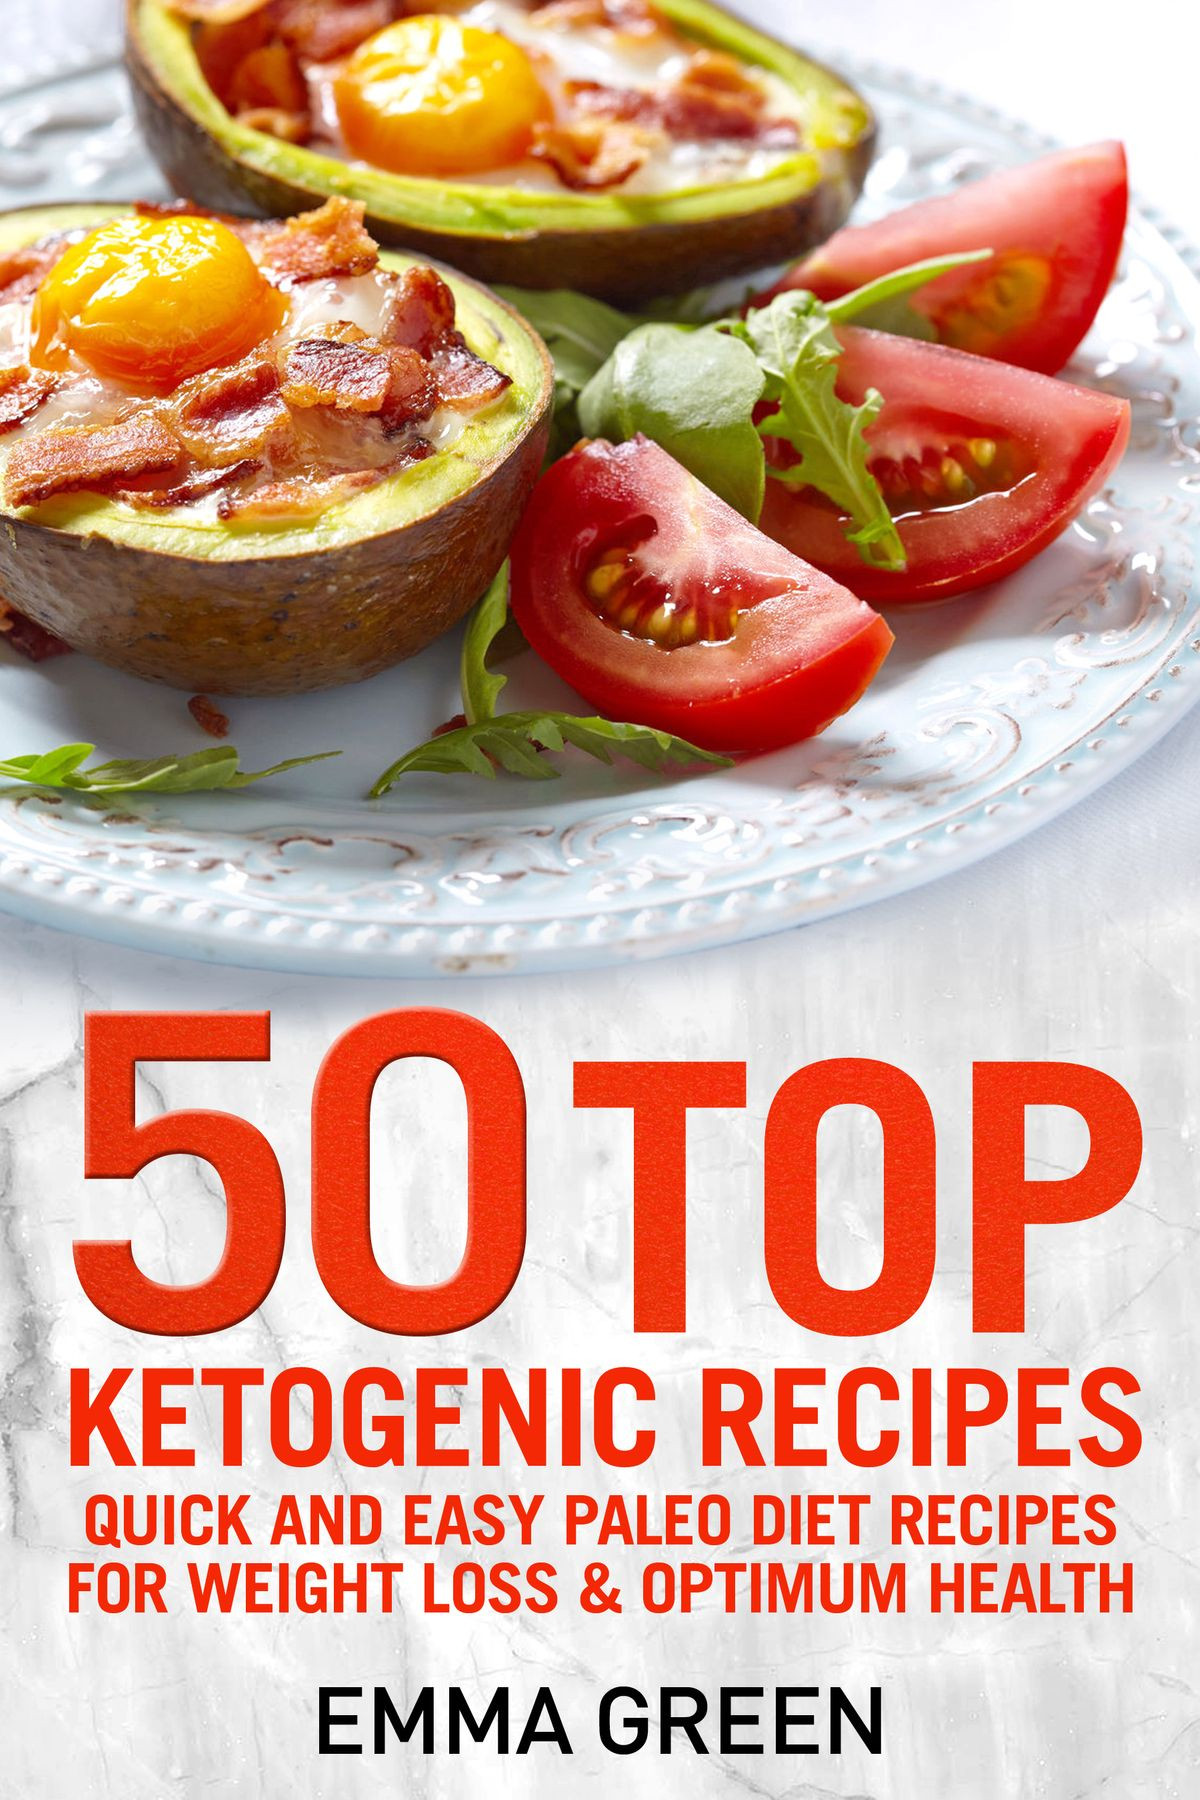 Ketosis Diet Recipes Losing Weight
 50 Top Ketogenic Recipes Quick and Easy Keto Diet Recipes